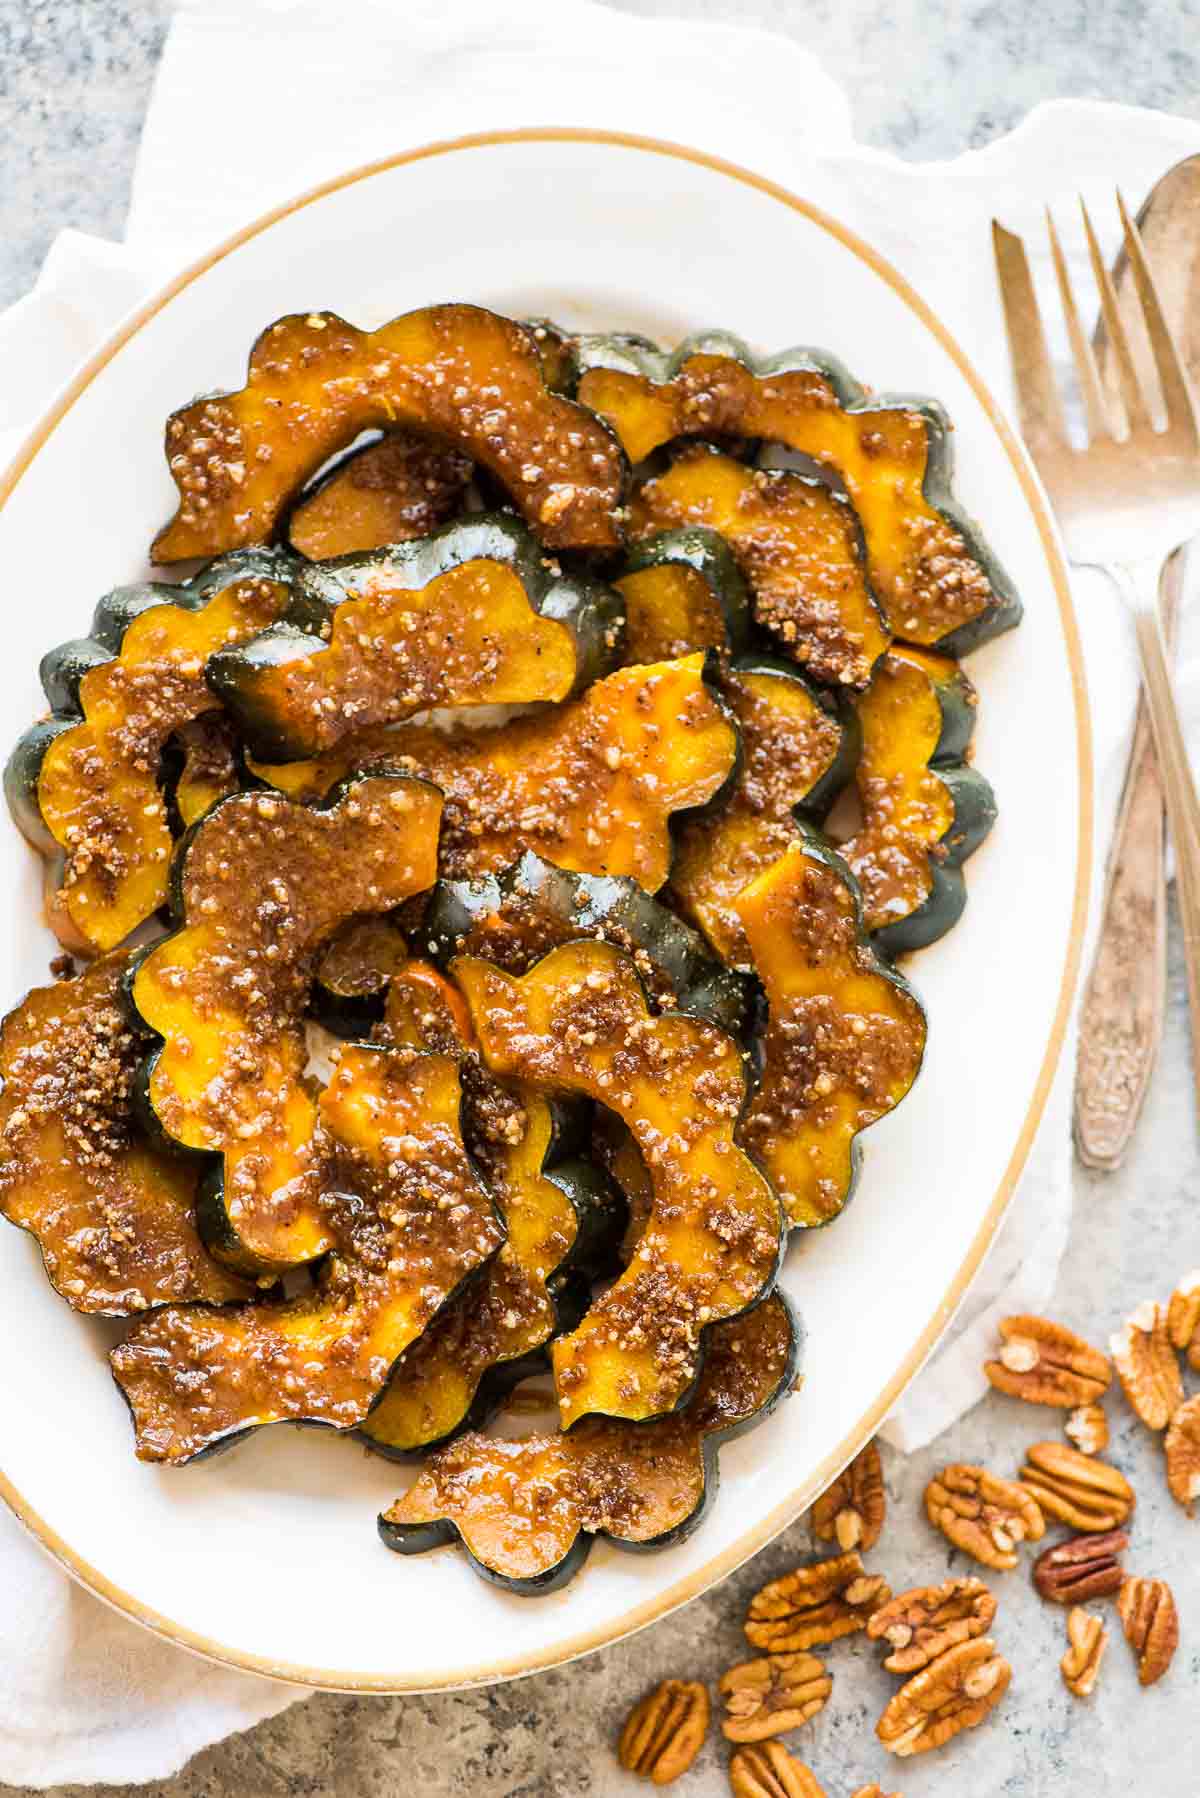 Baked Acorn Squash Slices with Brown Sugar and Pecans